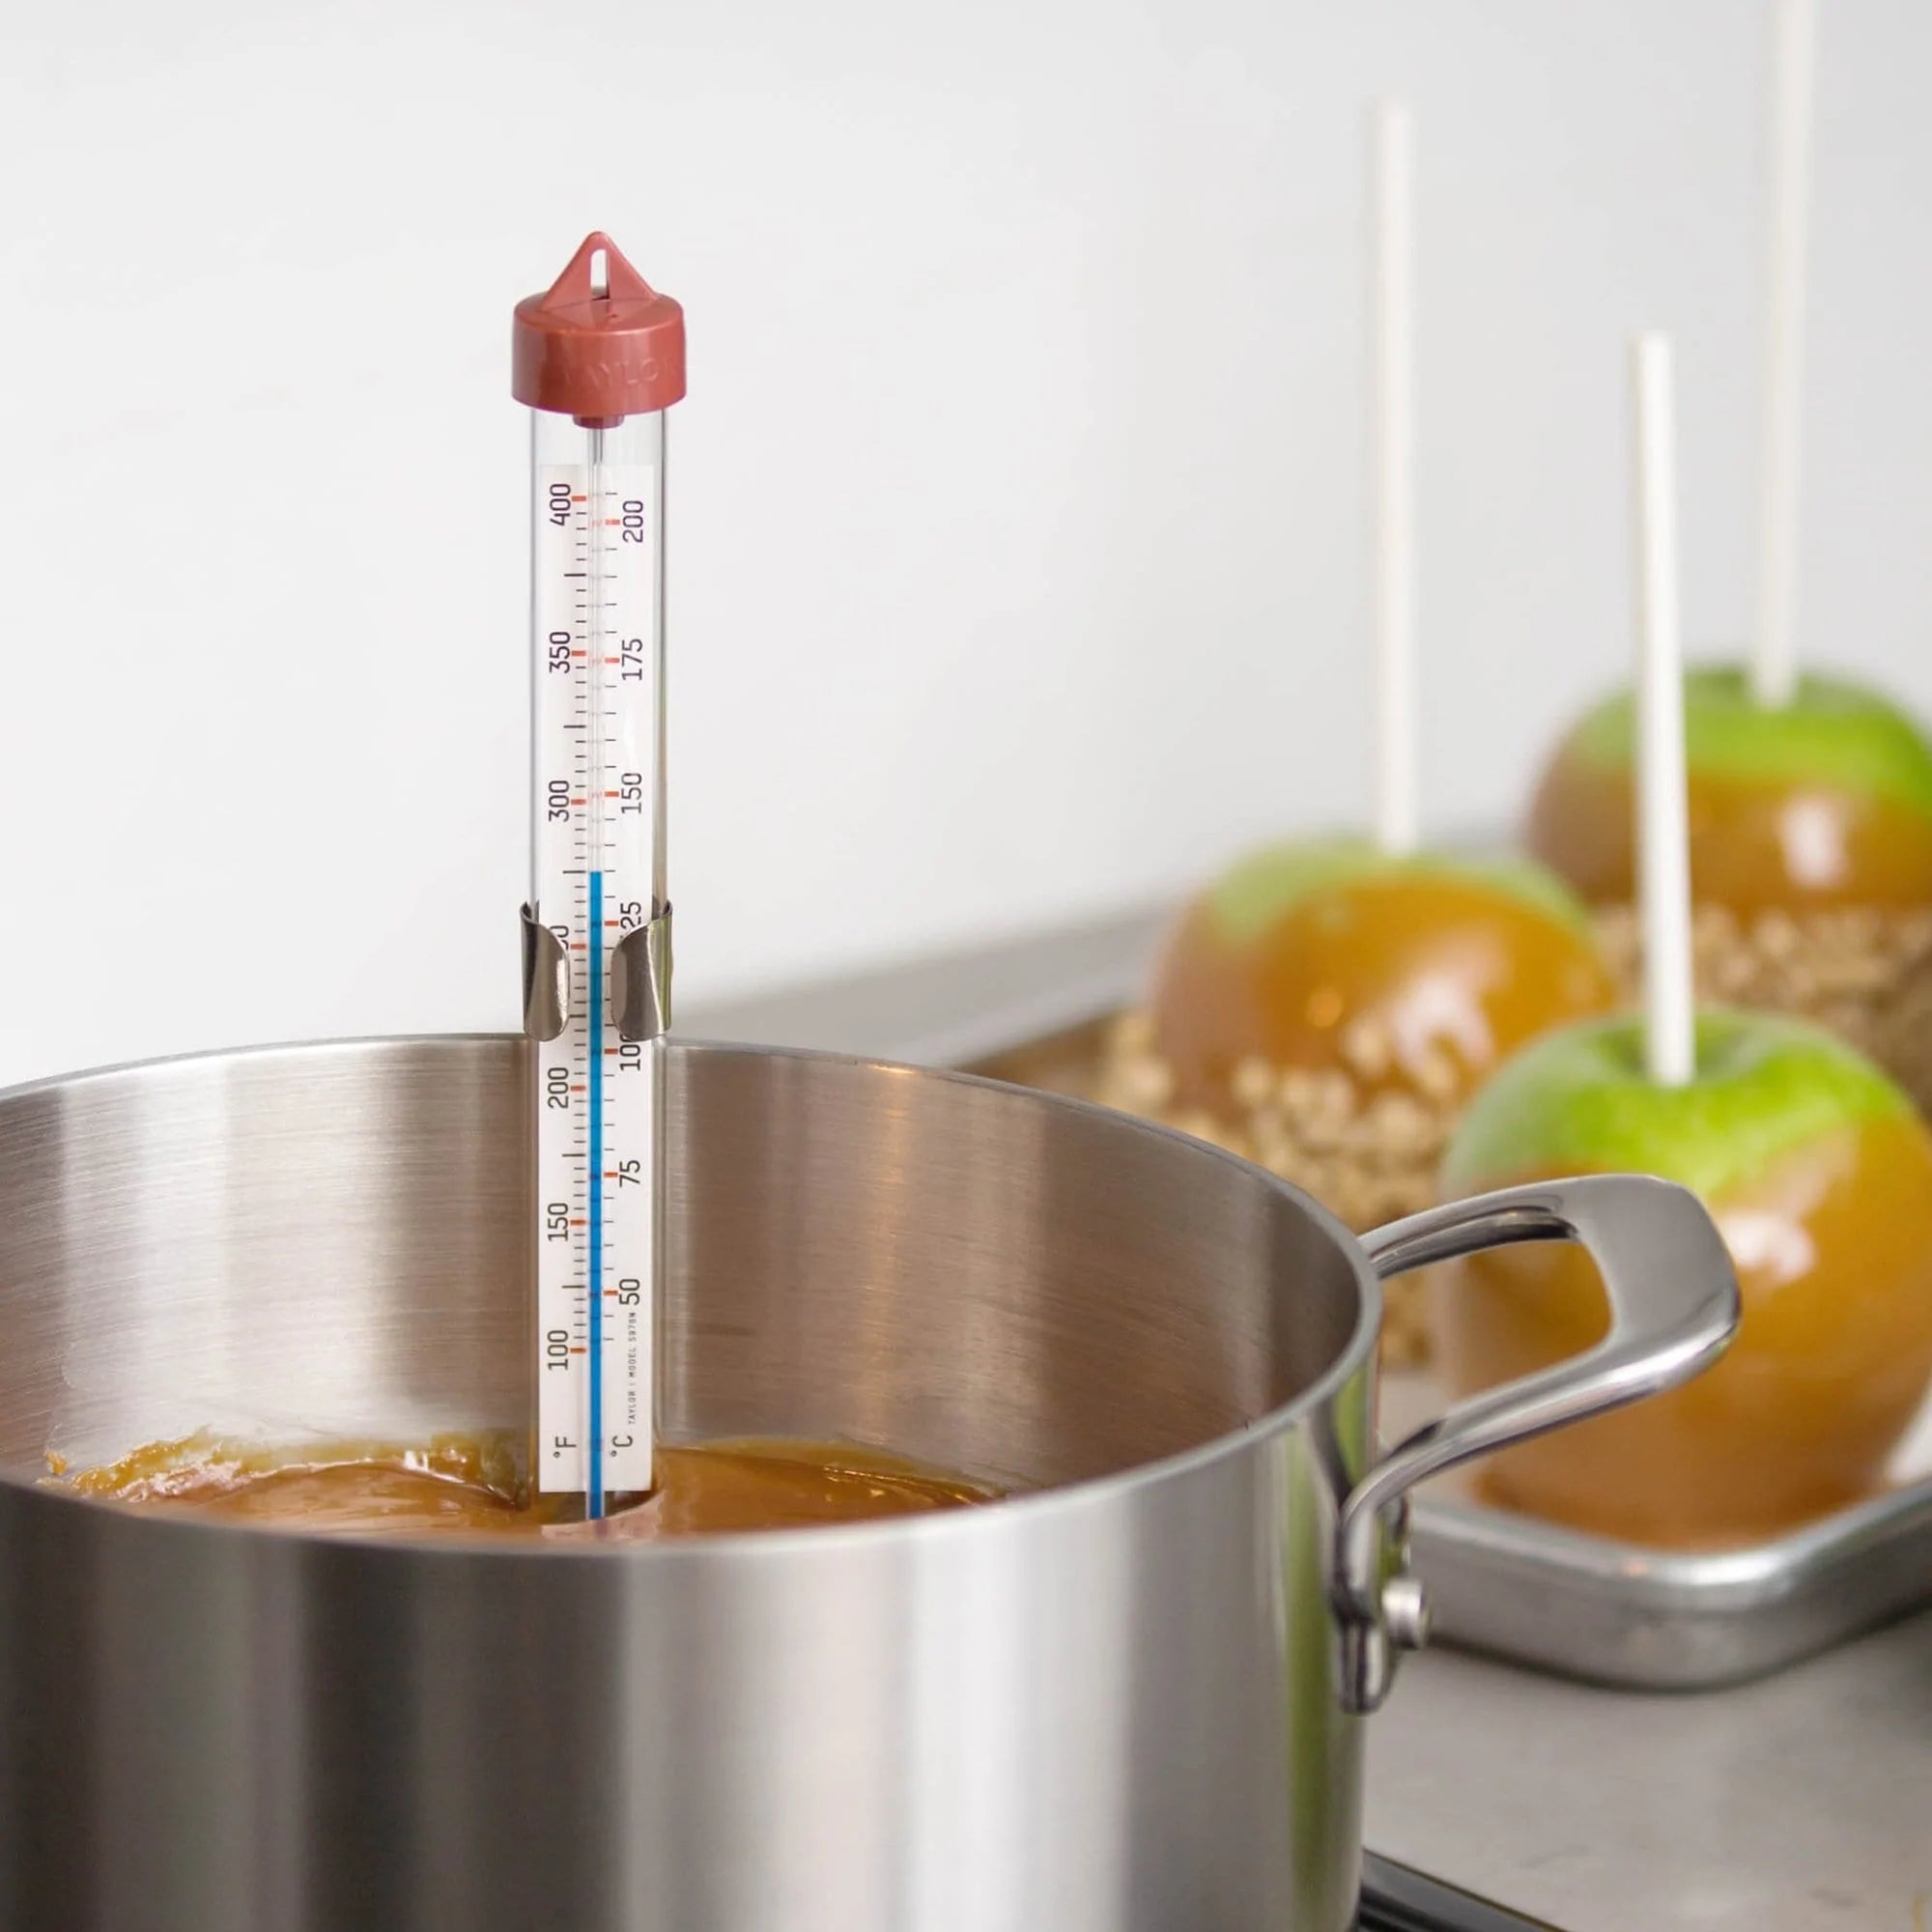 Escali Candy / Deep Fry Thermometer